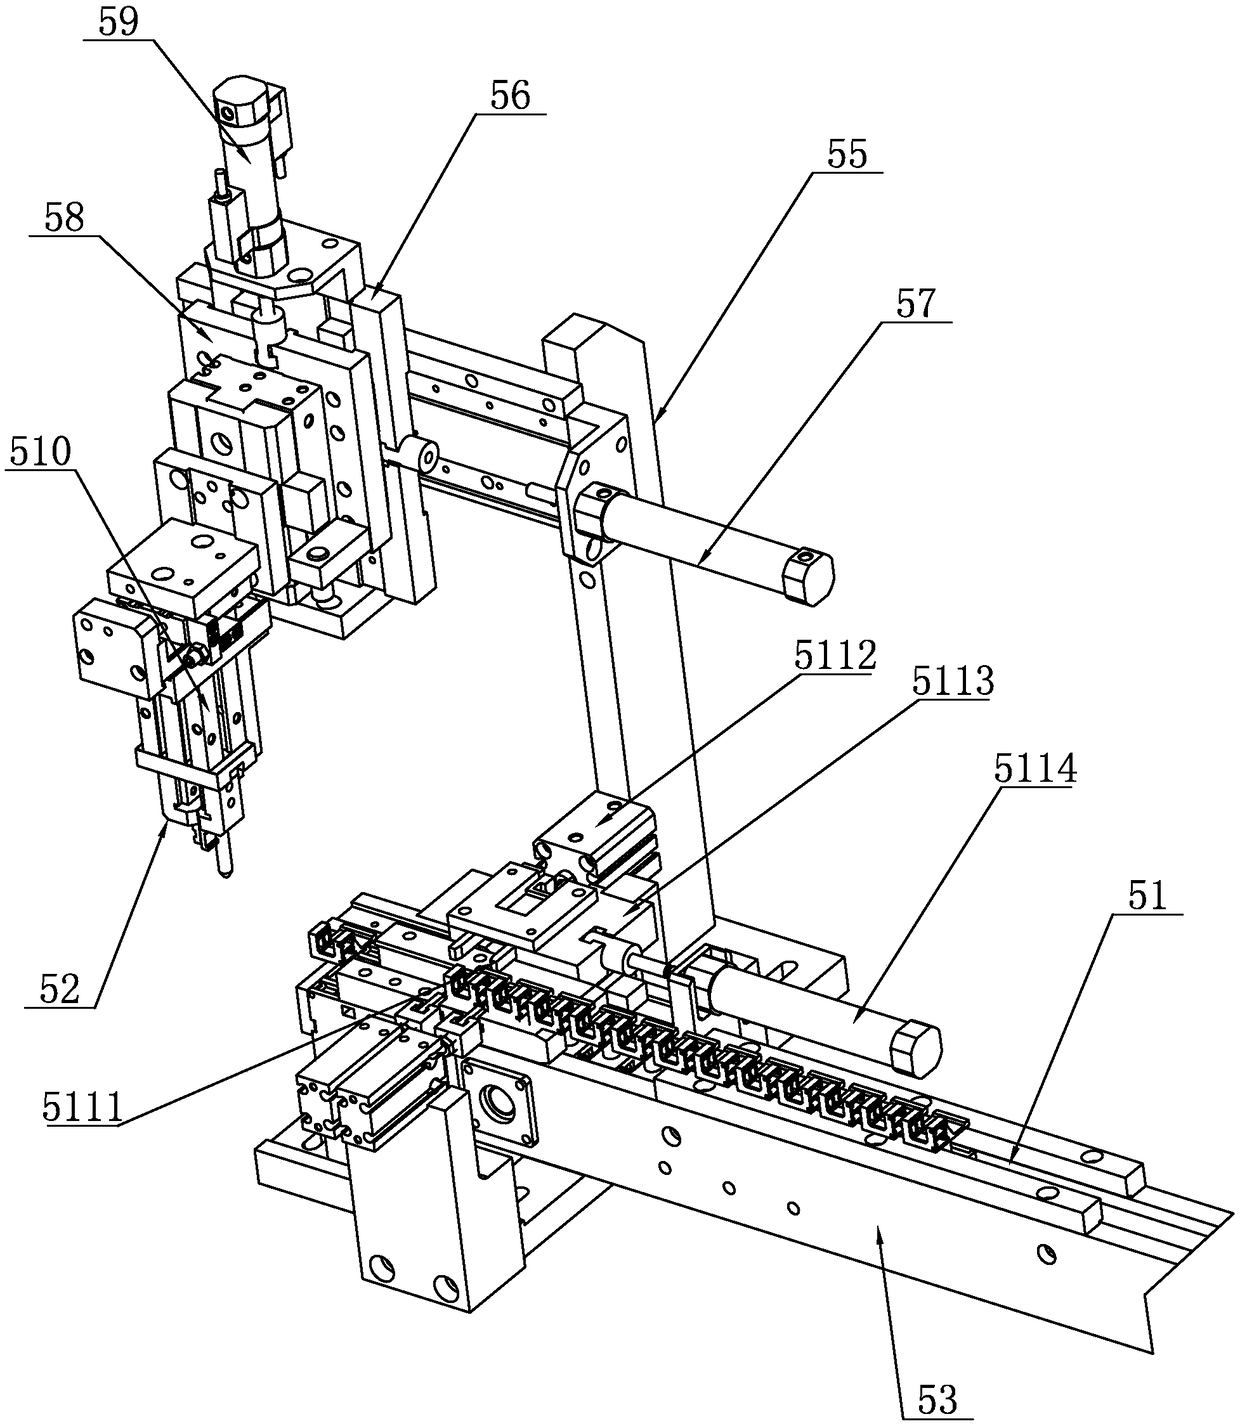 Automatic assembly device for coil bobbin